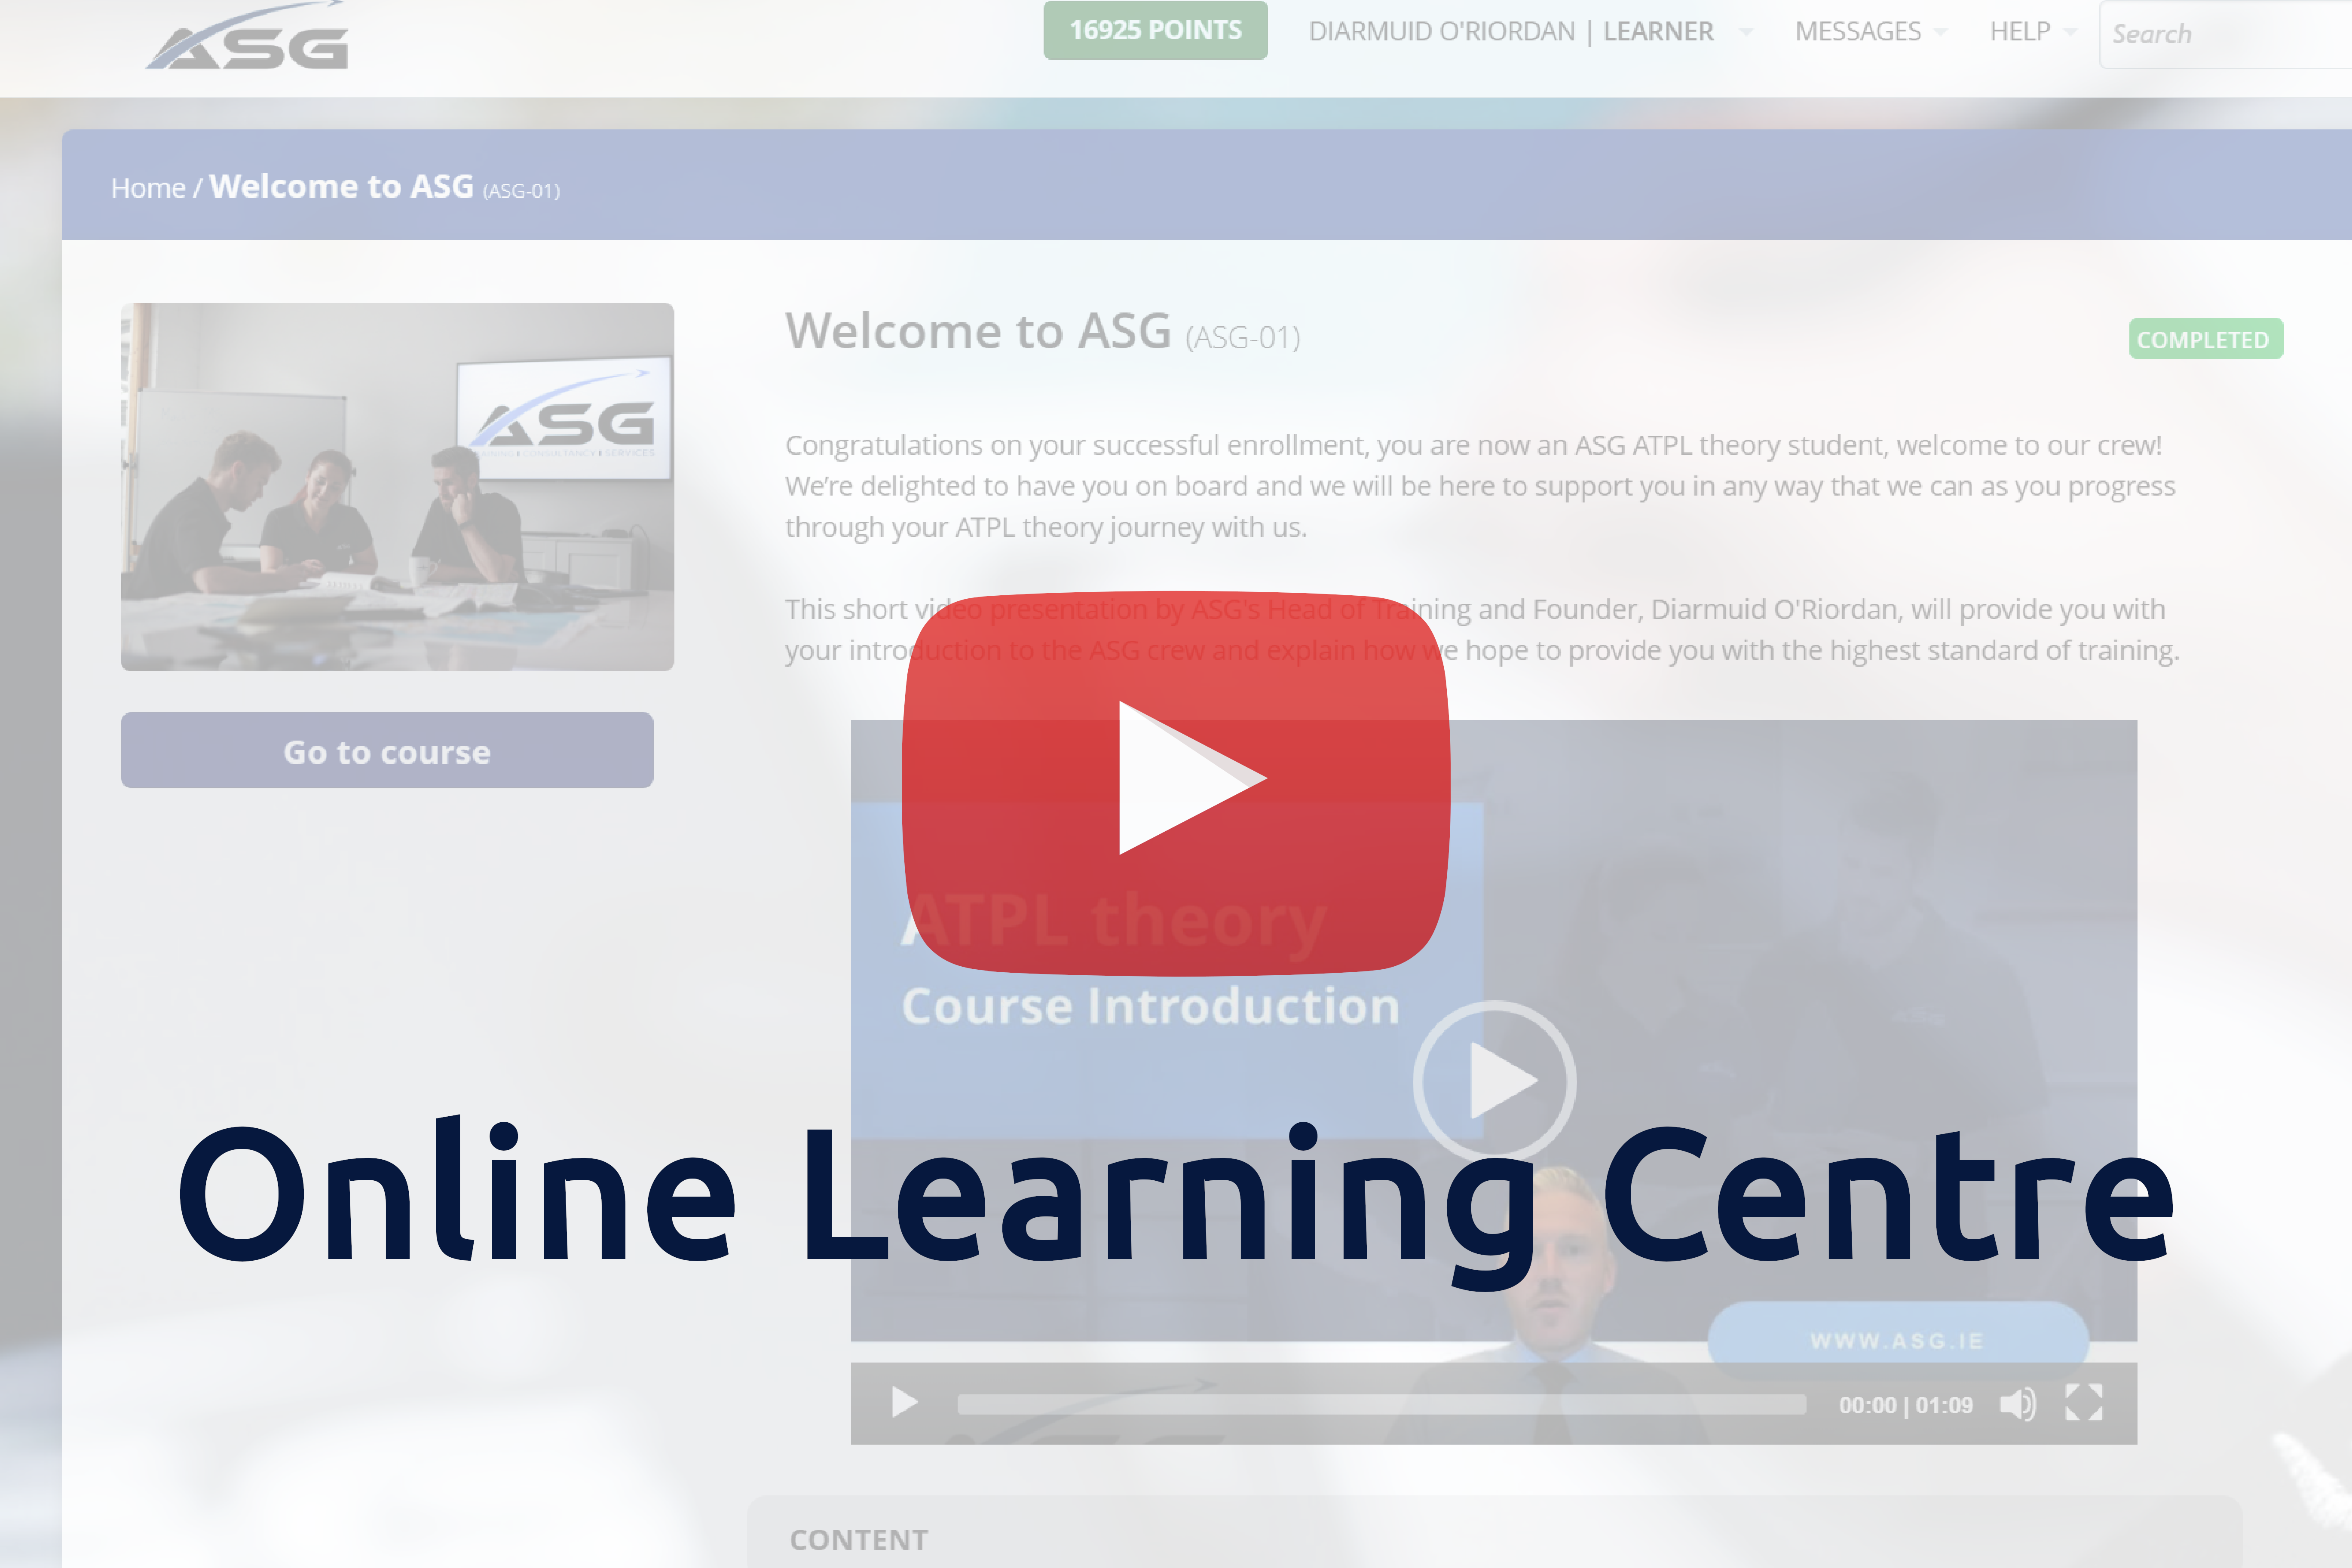 ASG Online Learning Centre